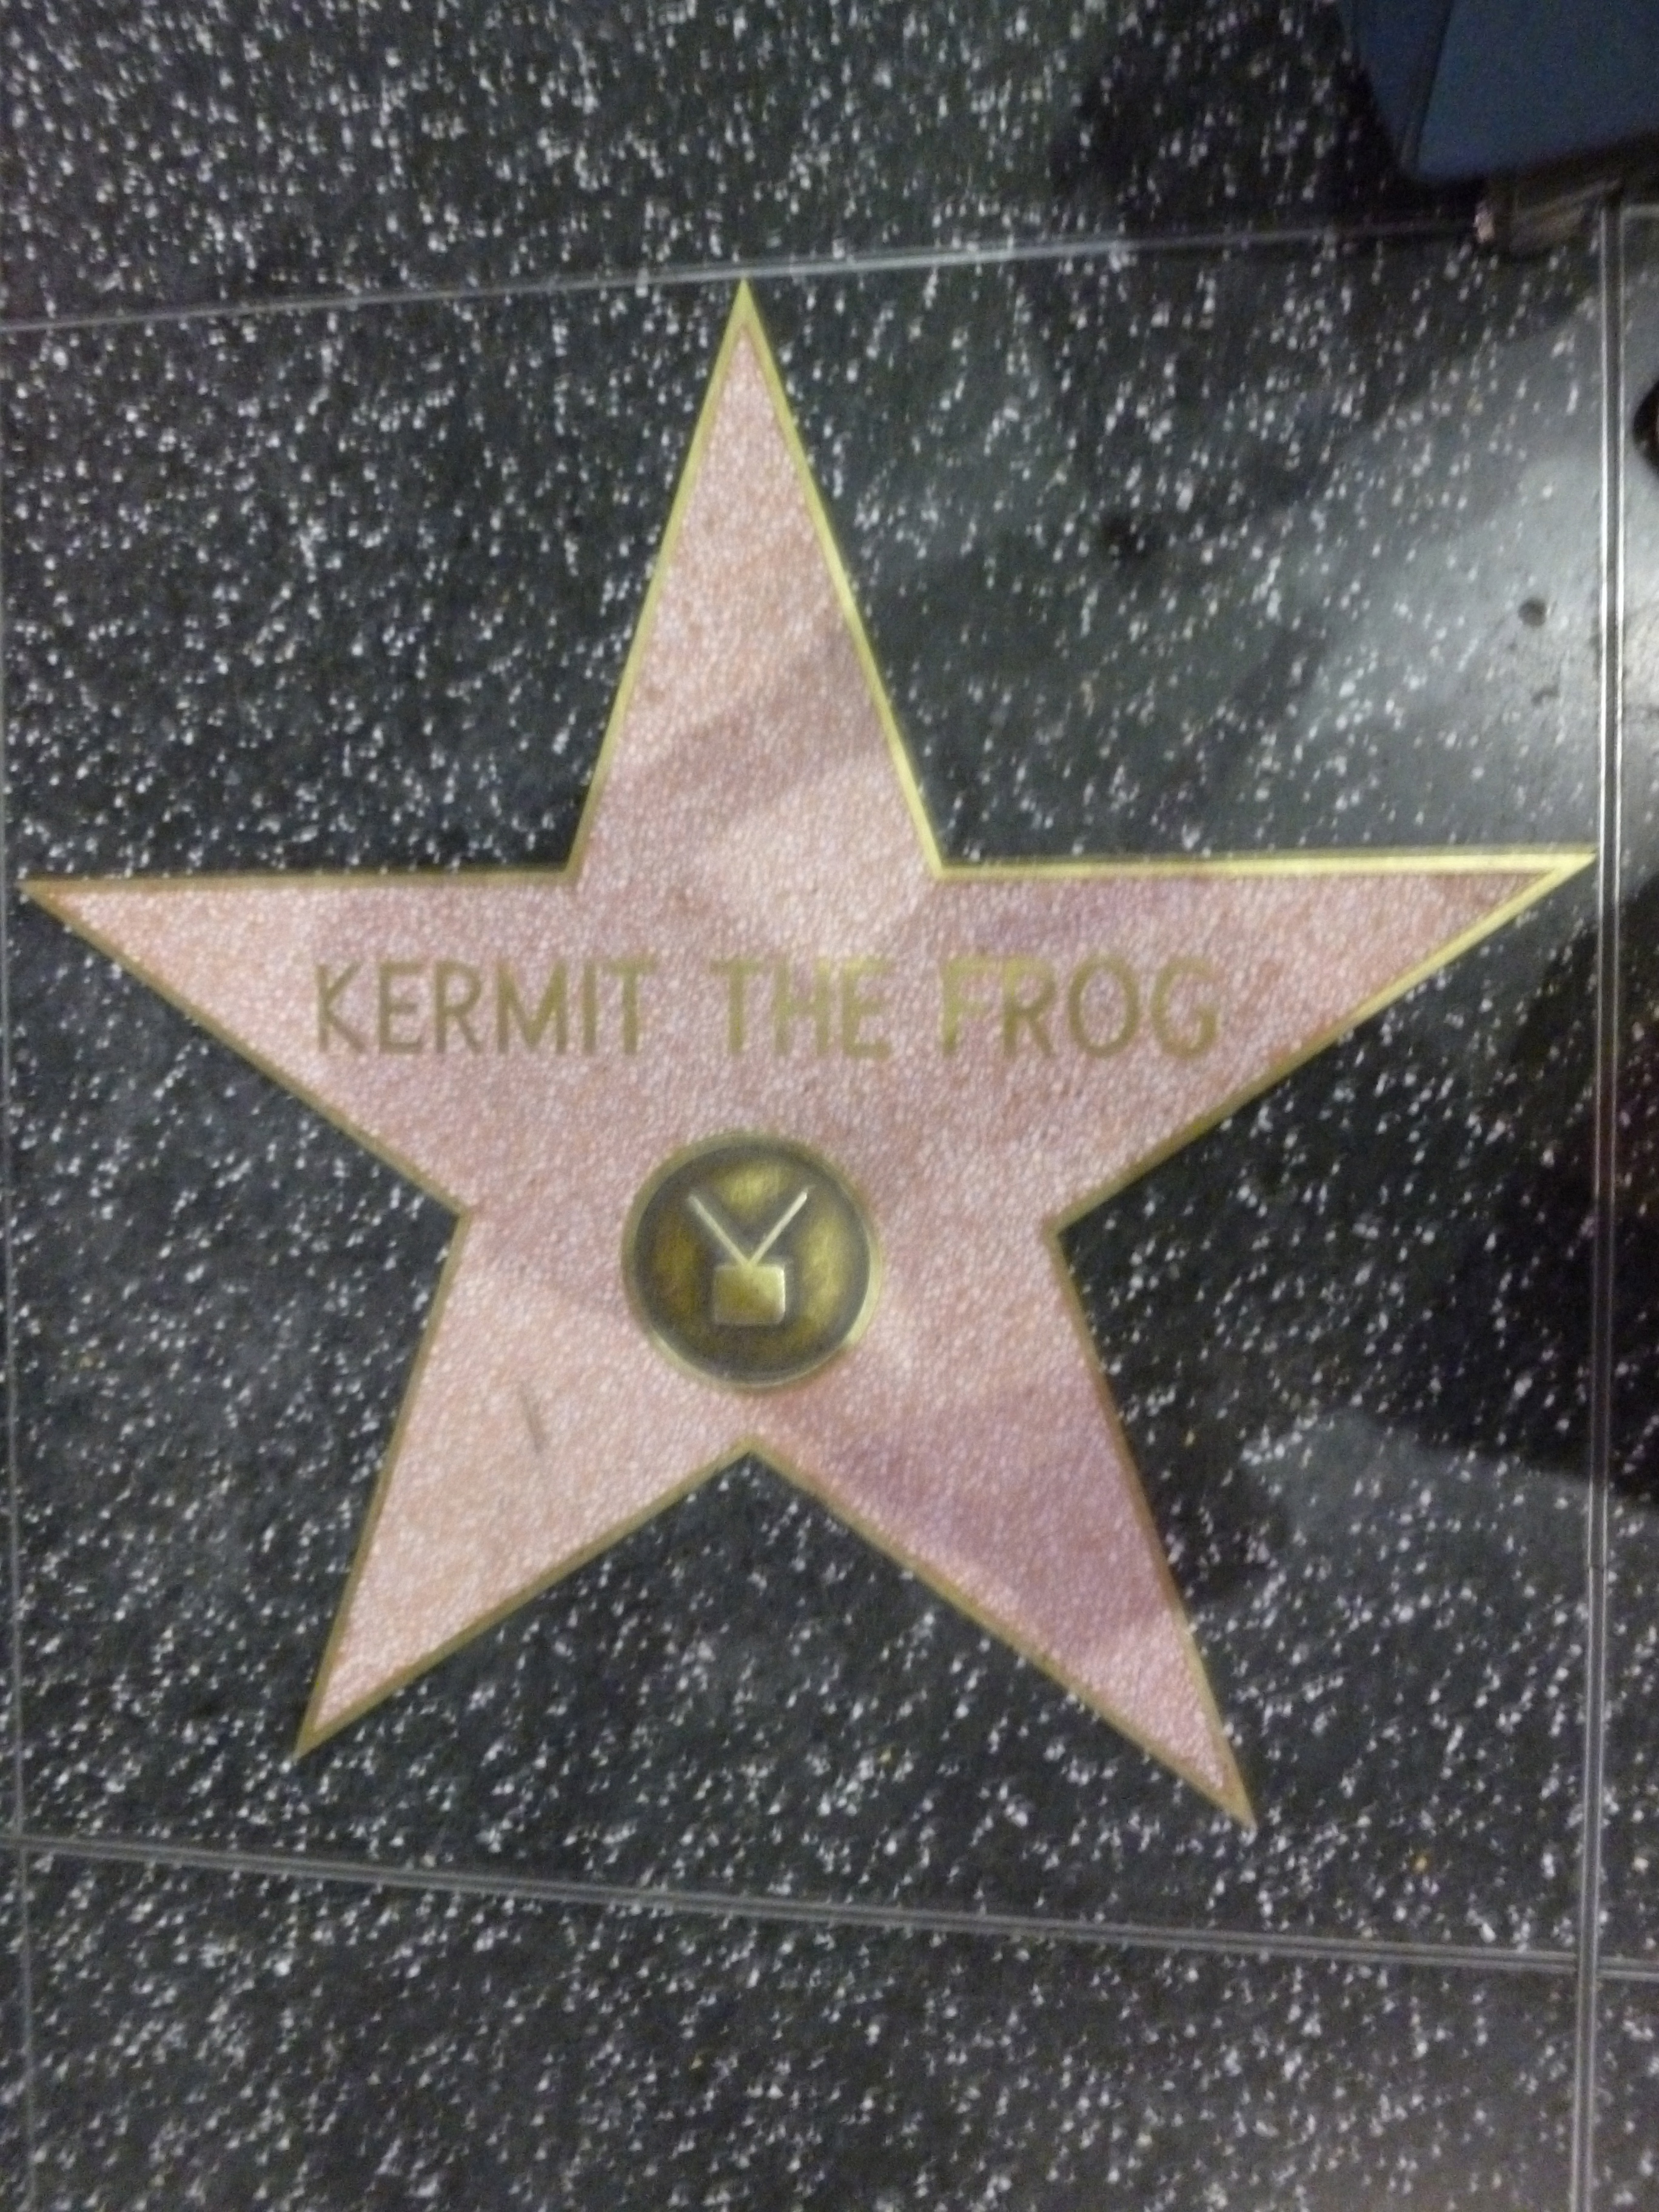 kermit the frog star hollywood